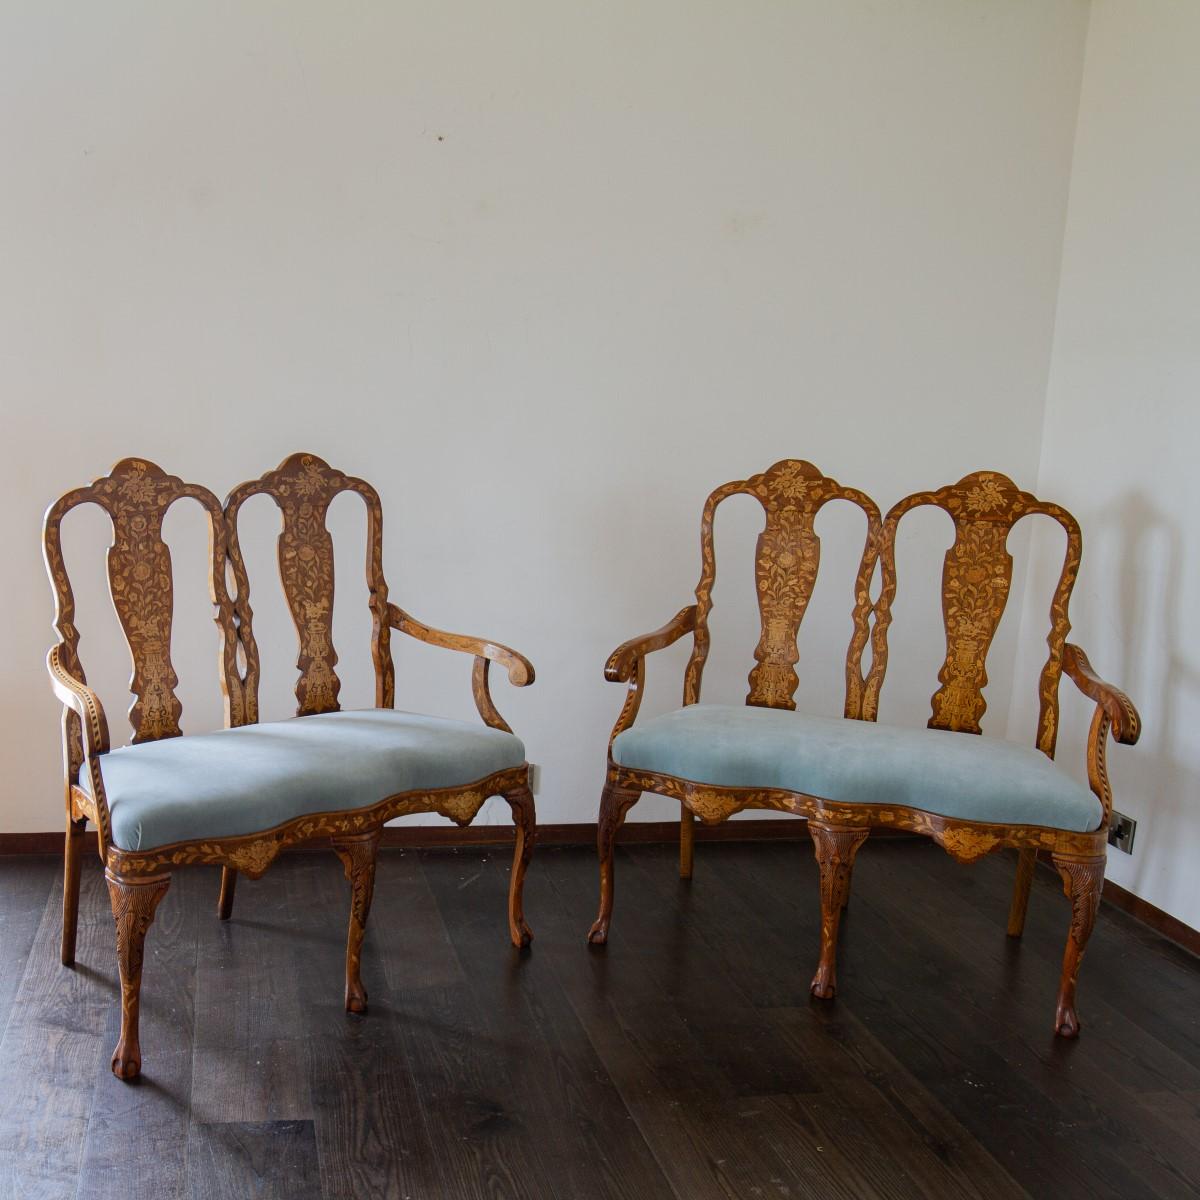 A pair of Dutch, 19th century walnut double chair back, two seater sofas, upholstered in a sky blue velvet with satinwood marquetry inlays of flora, cherubs, birds and masks. The serpentine seat rail is supported by cabriole legs complete with